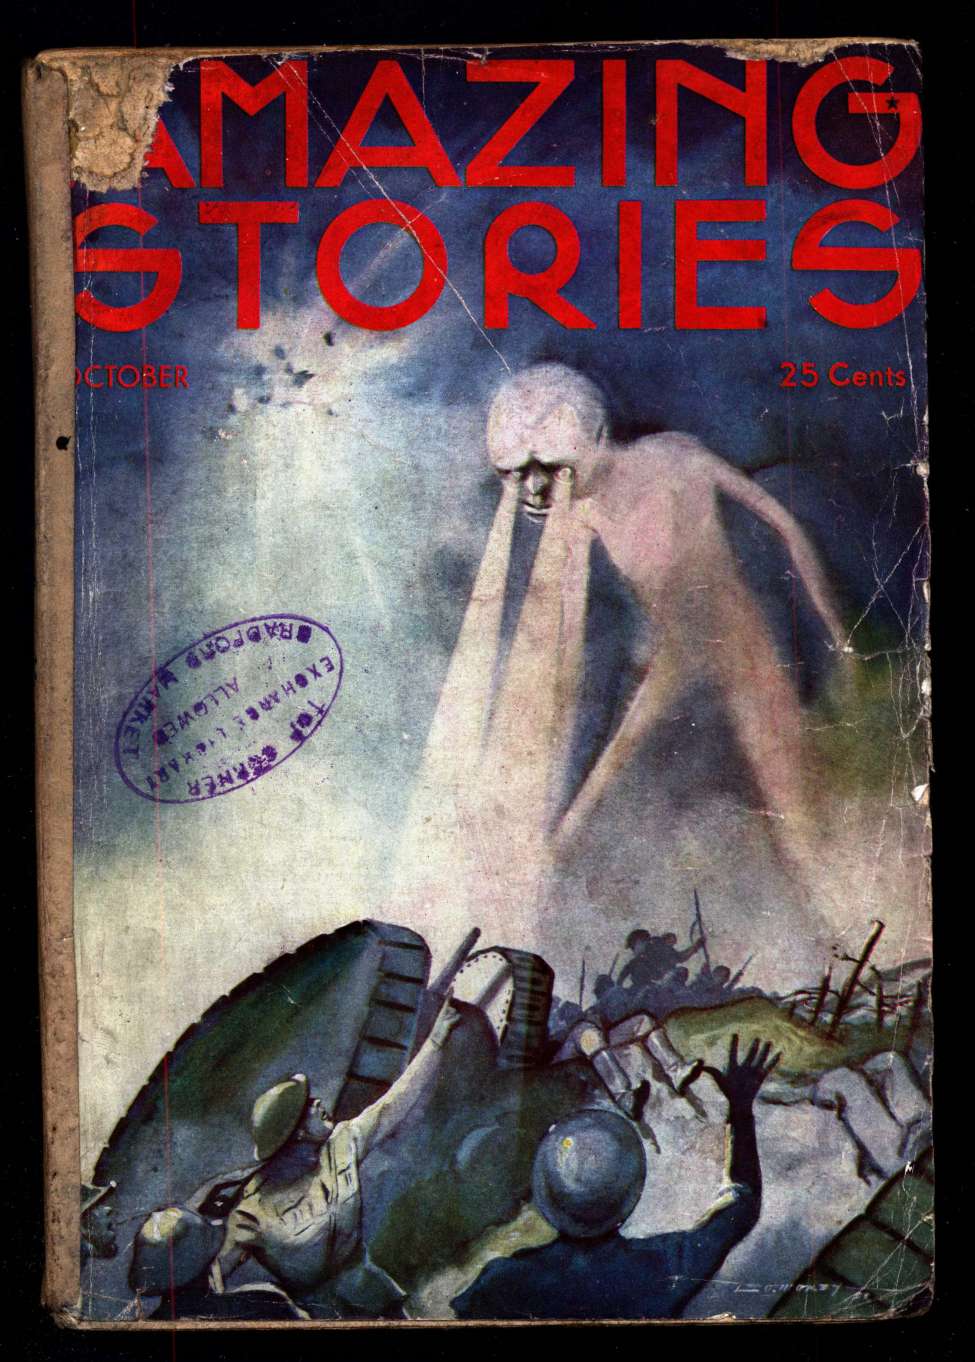 Book Cover For Amazing Stories v8 6 - The Men Without Shadows - Stanton A. Coblentz